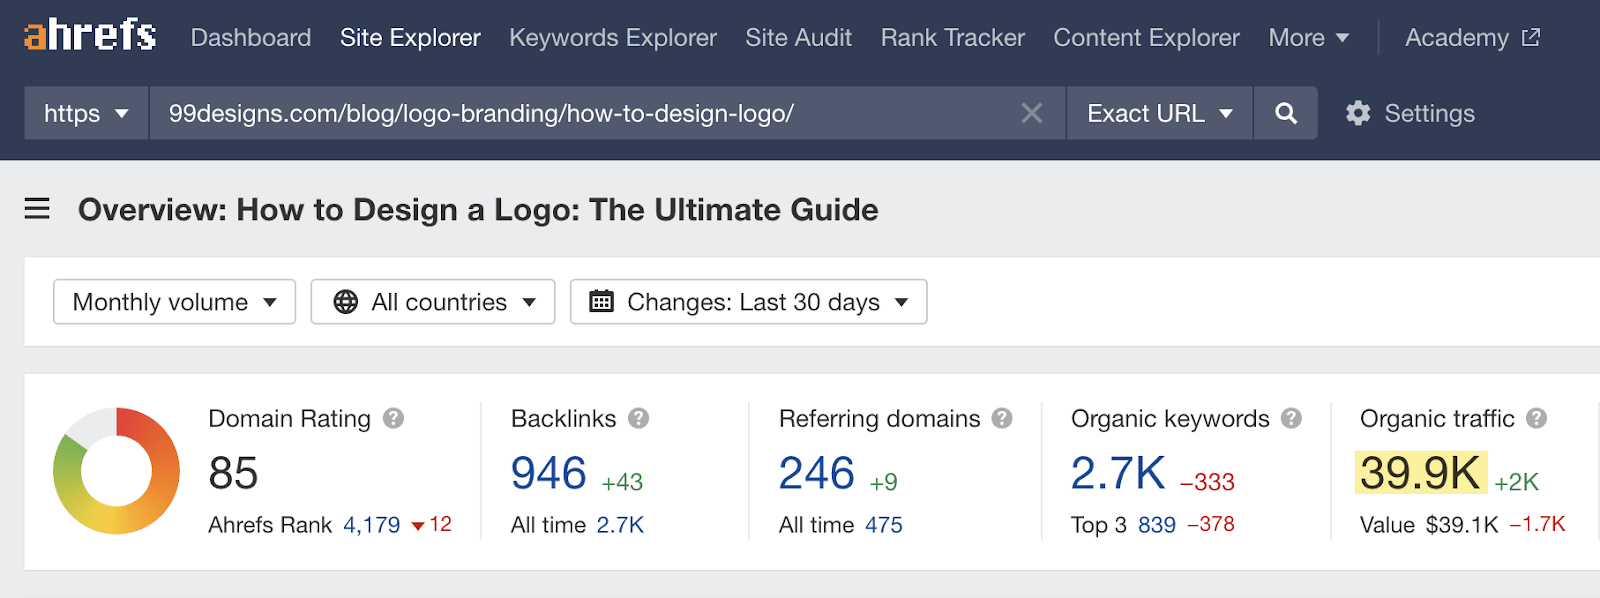 99Designs' guide's estimated monthly traffic in Ahrefs